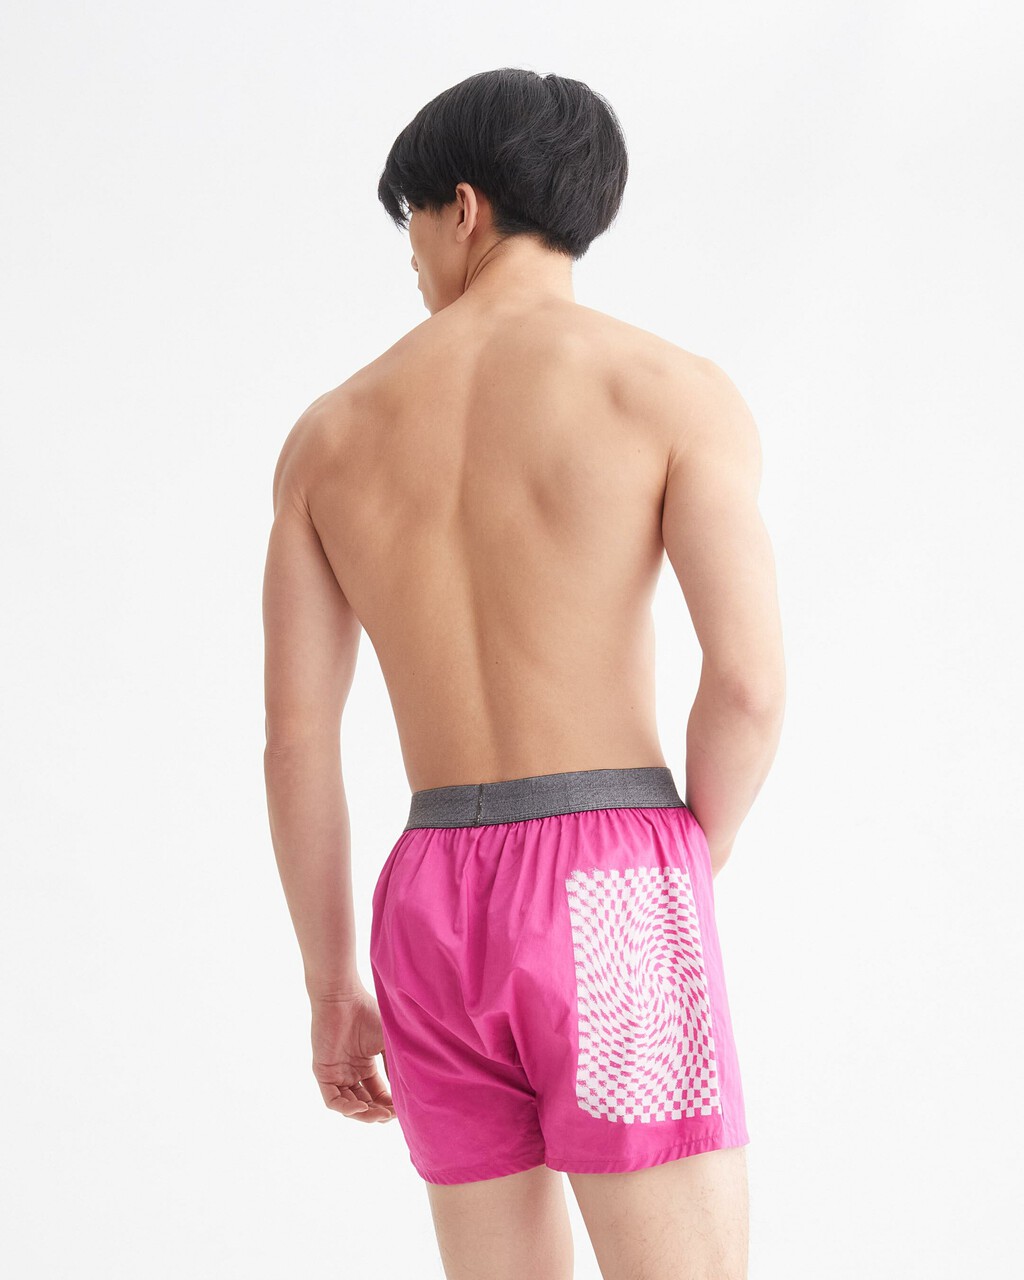 Calvin Klein 1996 Traditional Boxers, Palace Pink, hi-res